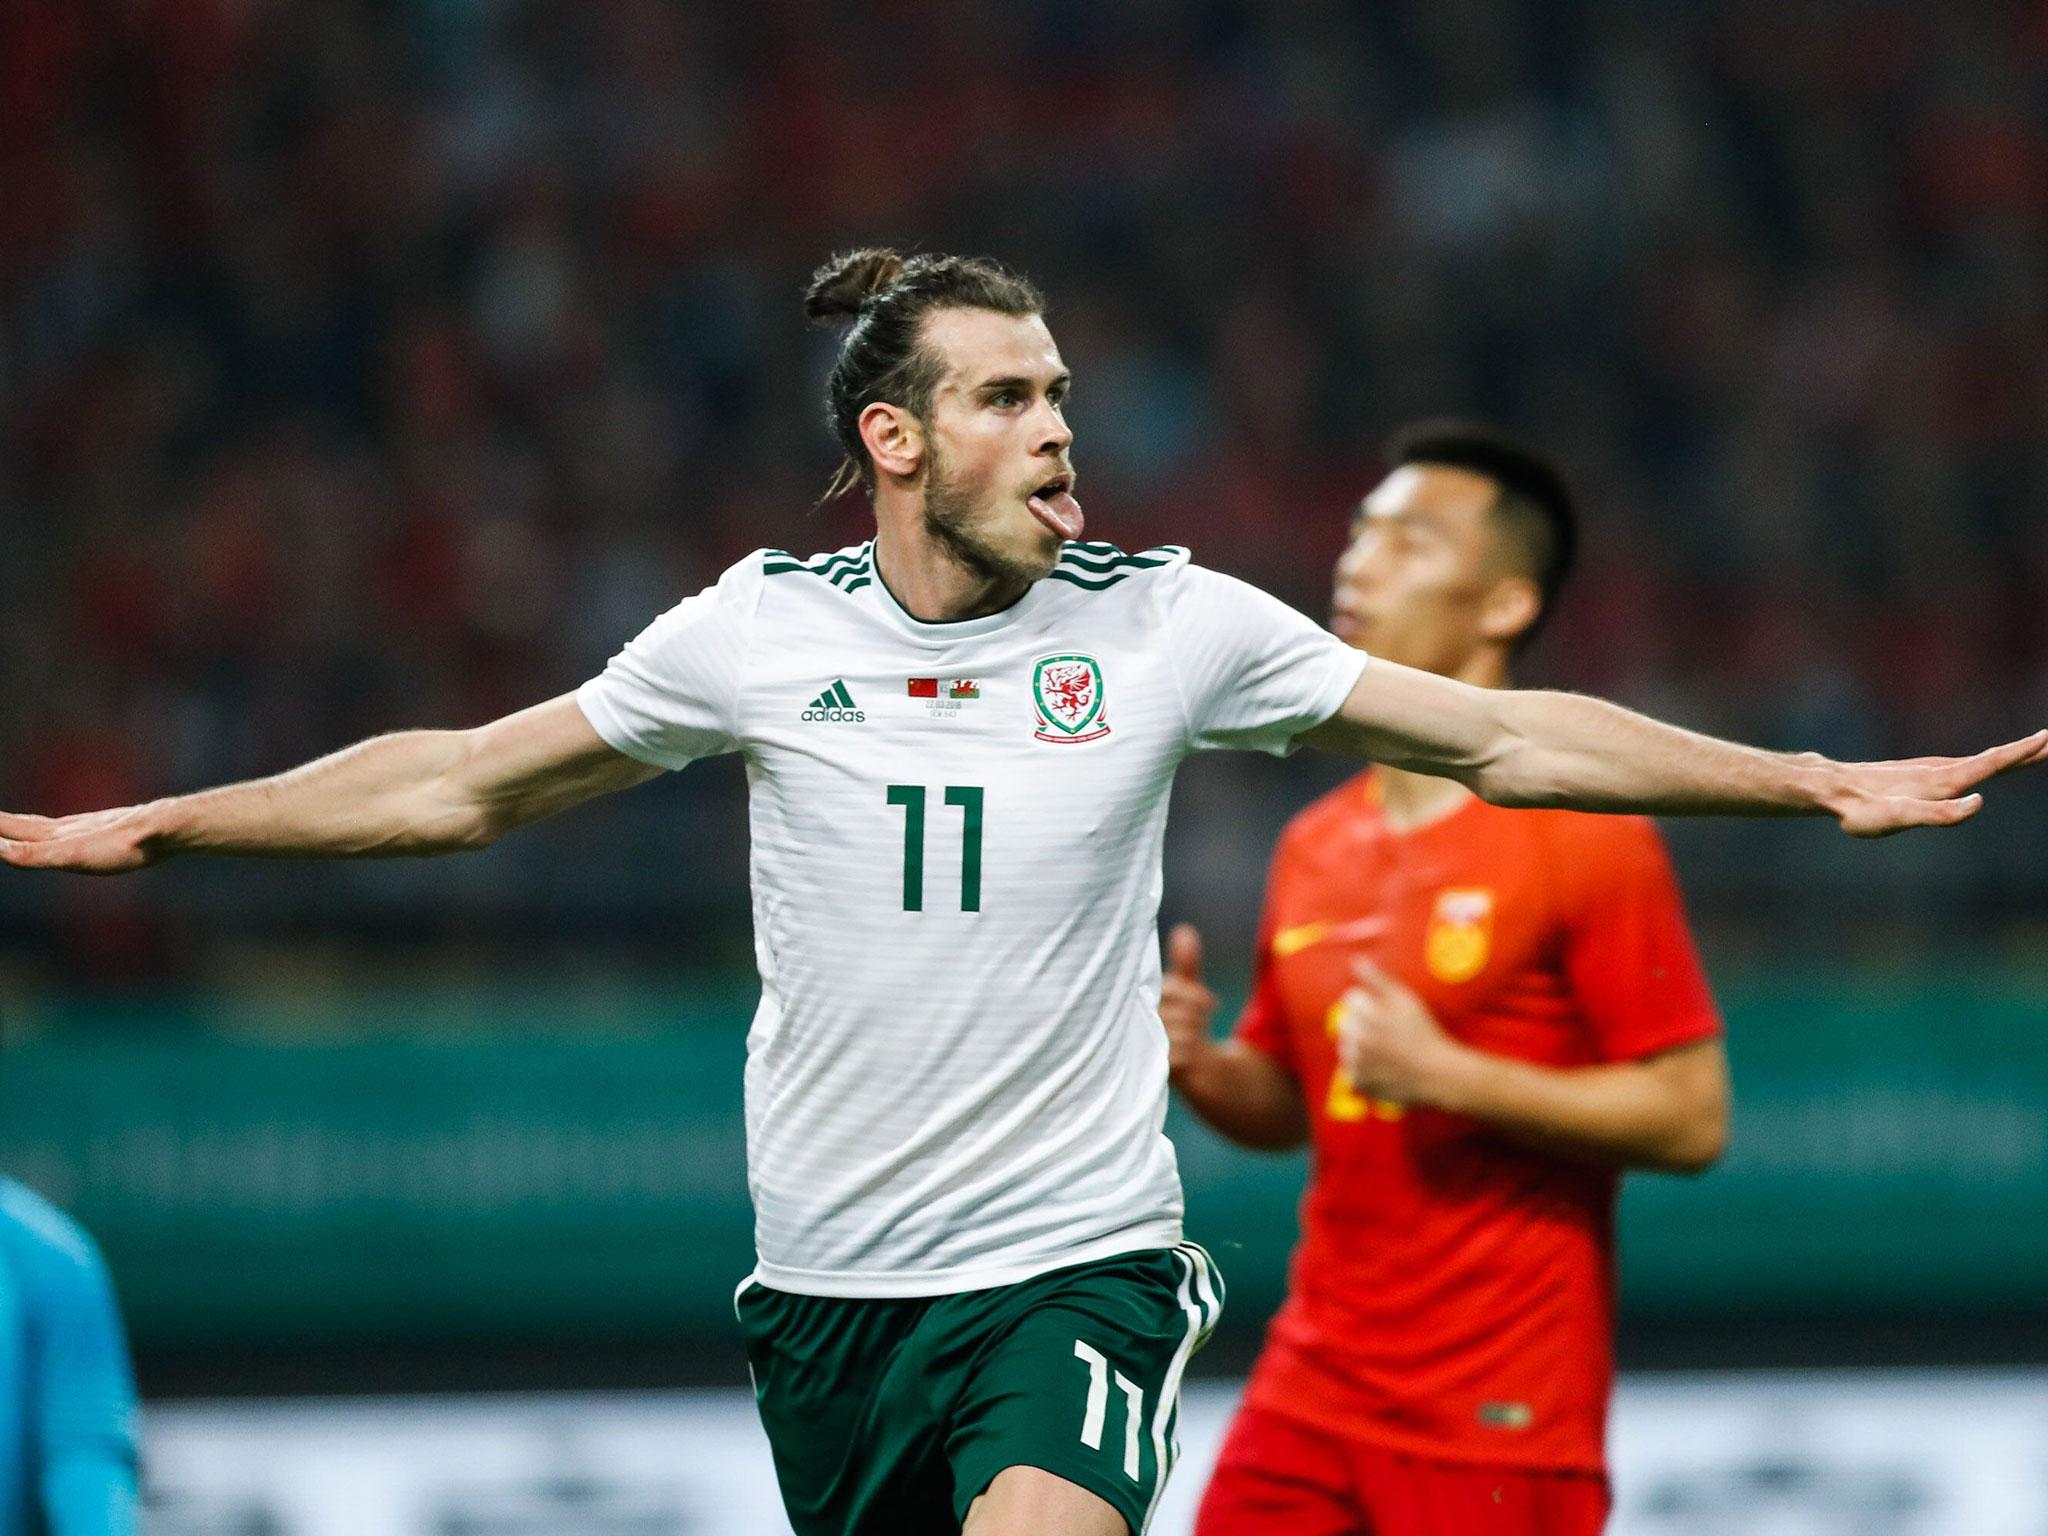 Gareth Bale remains subject to interest from Jose Mourinho